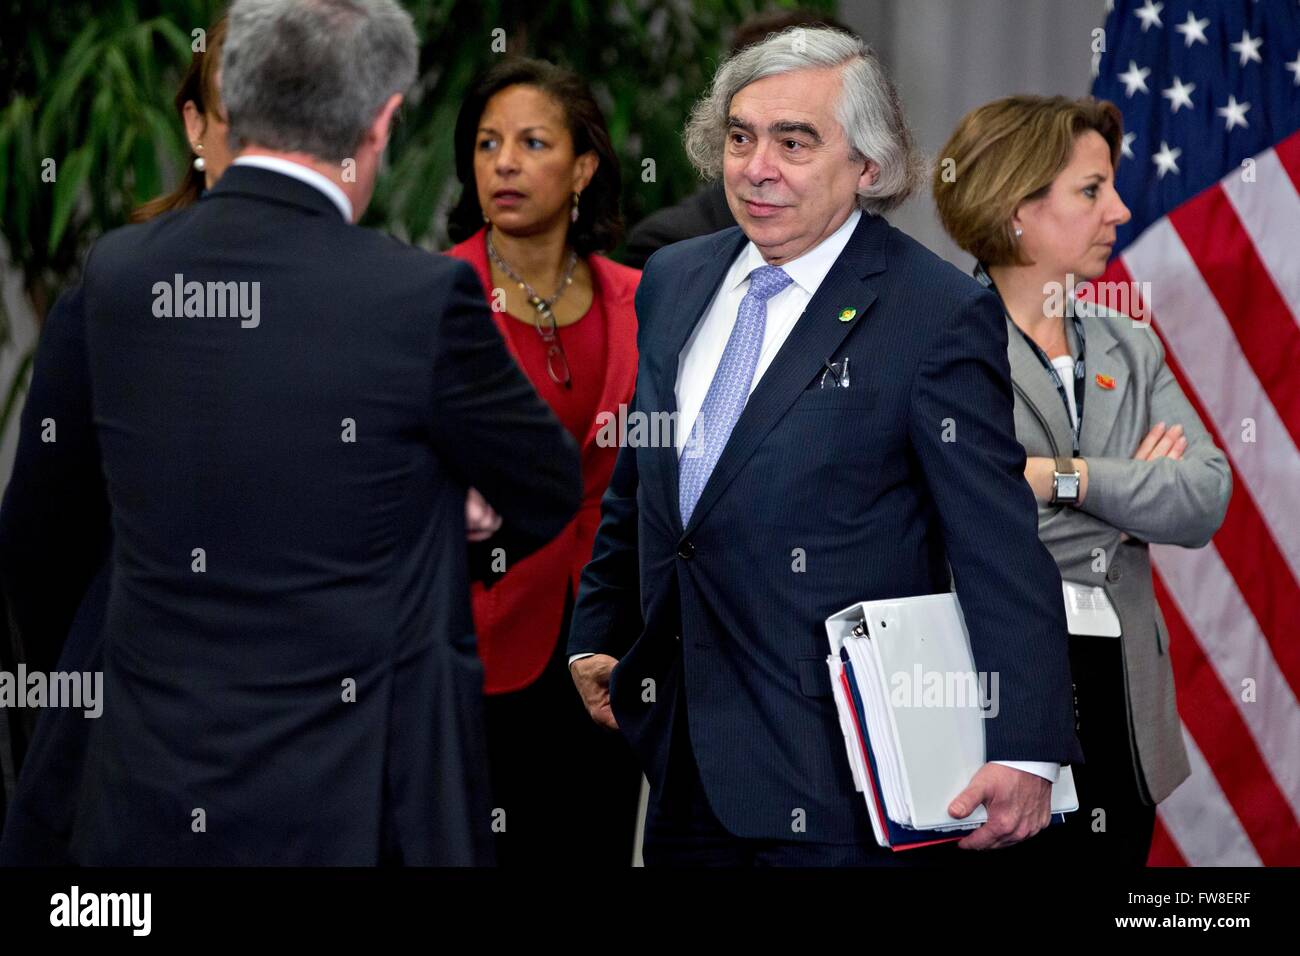 United States Secretary of Energy Ernest Moniz, center, and Susan Rice, U.S. national security advisor, center left, arrive to the P5 1 multilateral meeting at the Nuclear Security Summit in Washington, DC, U.S., on Friday, April 1, 2016. After a spate of terrorist attacks from Europe to Africa, U.S. President Barack Obama is rallying international support during the summit for an effort to keep Islamic State and similar groups from obtaining nuclear material and other weapons of mass destruction. Credit: Andrew Harrer/Pool via CNP - NO WIRE SERVICE - Stock Photo